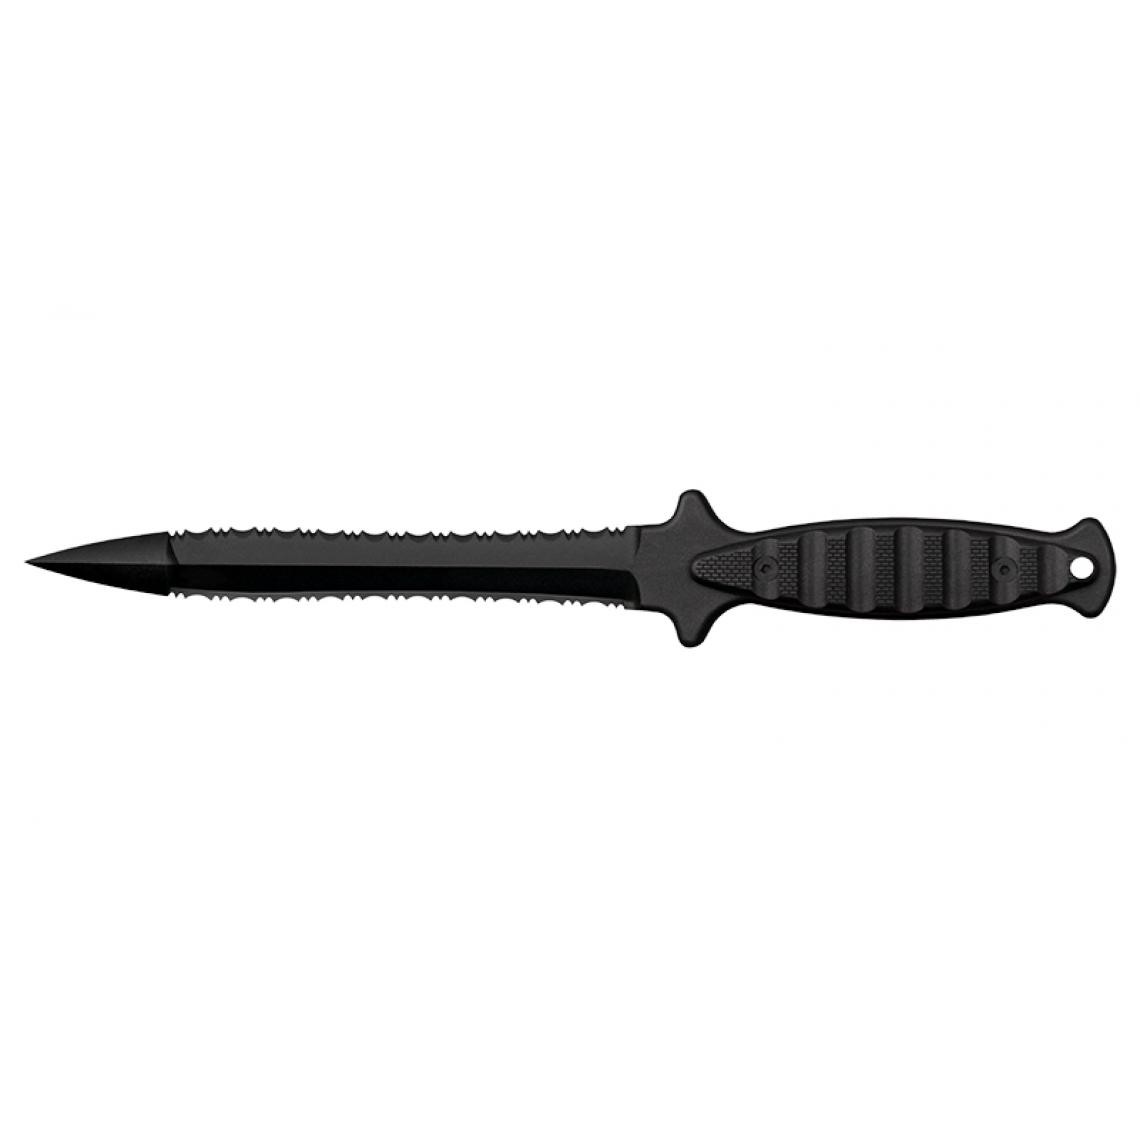 Divers Marques - COLD STEEL - CS92FMA - FGX WASP - Outils de coupe